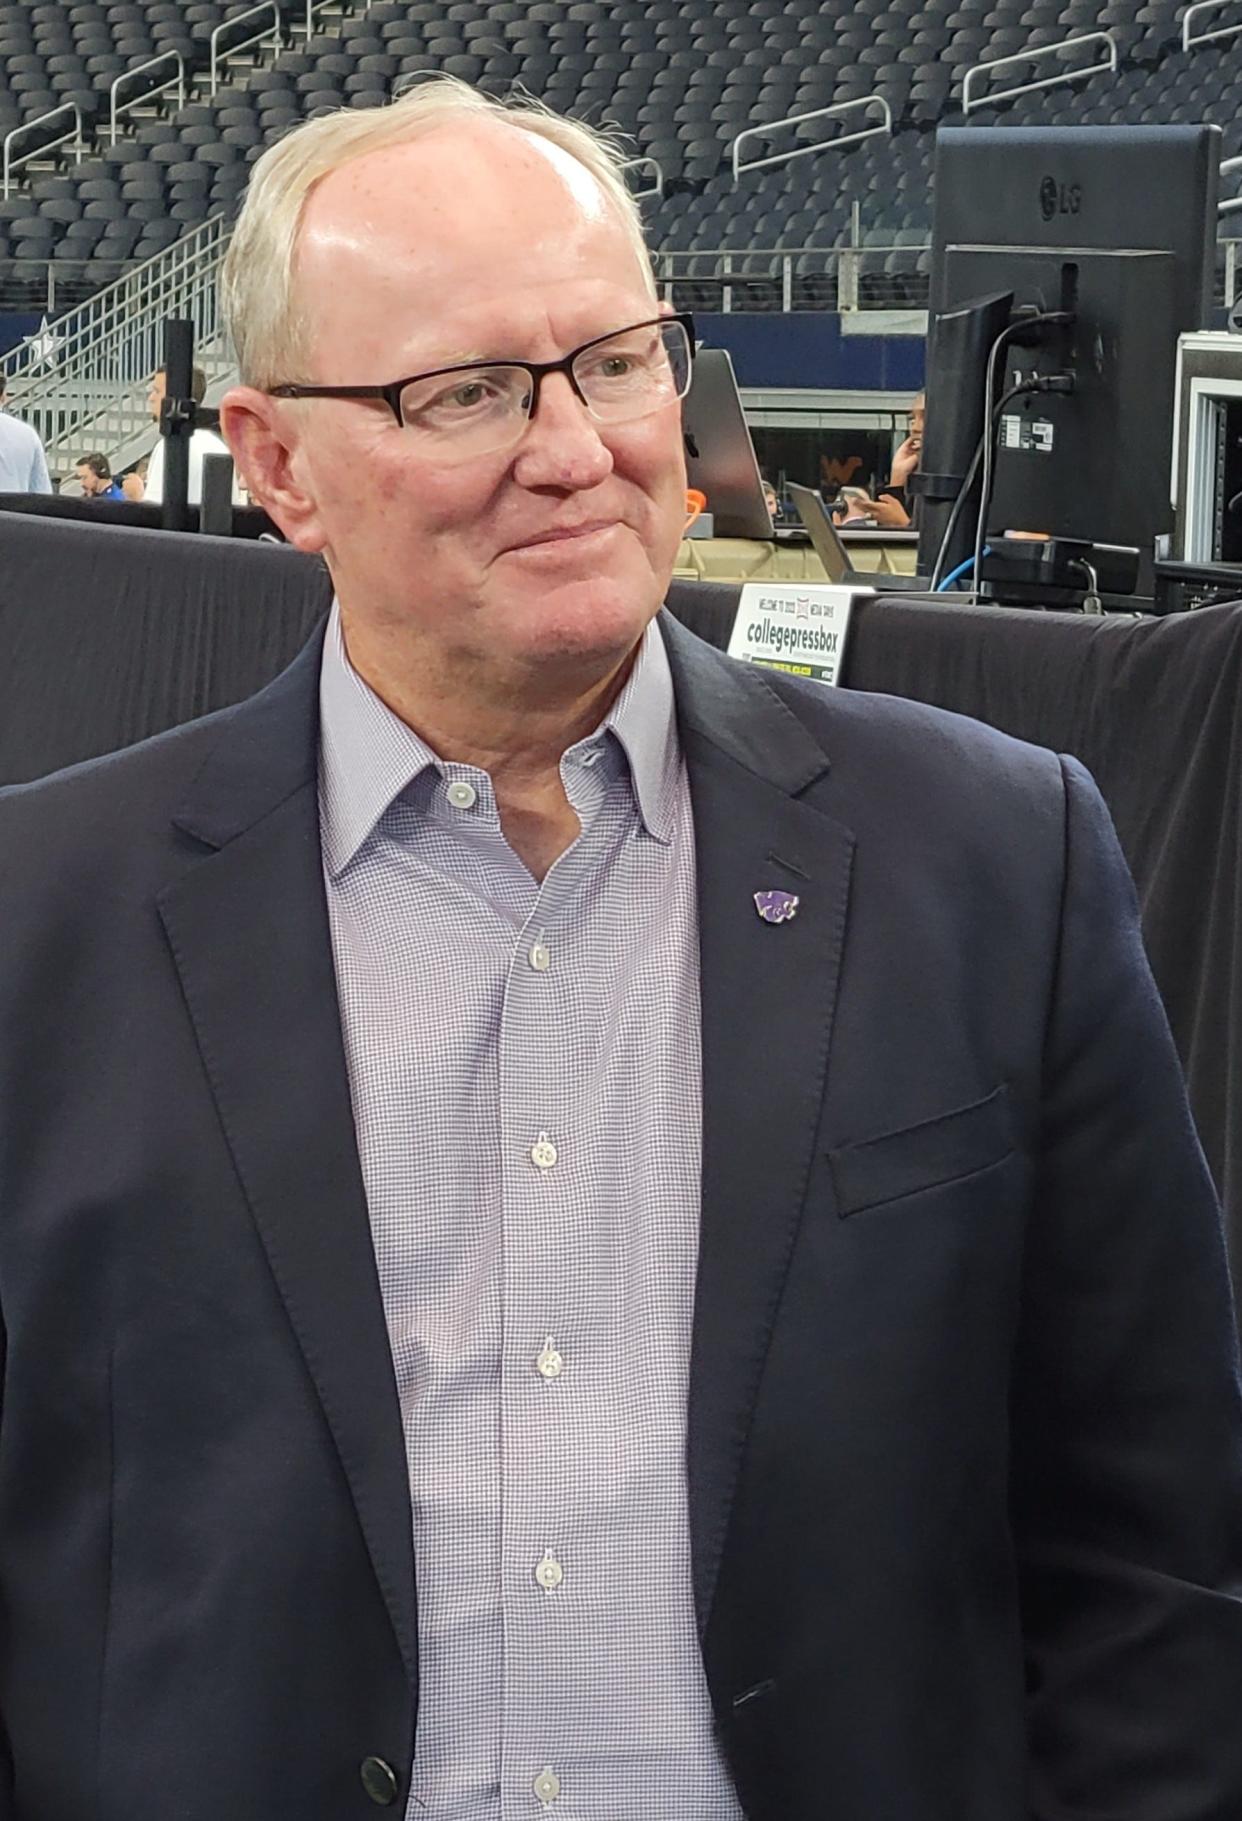 Kansas State's Gene Taylor has been named AD of the Year by the National Association of Collegiate Directors of Athletics.